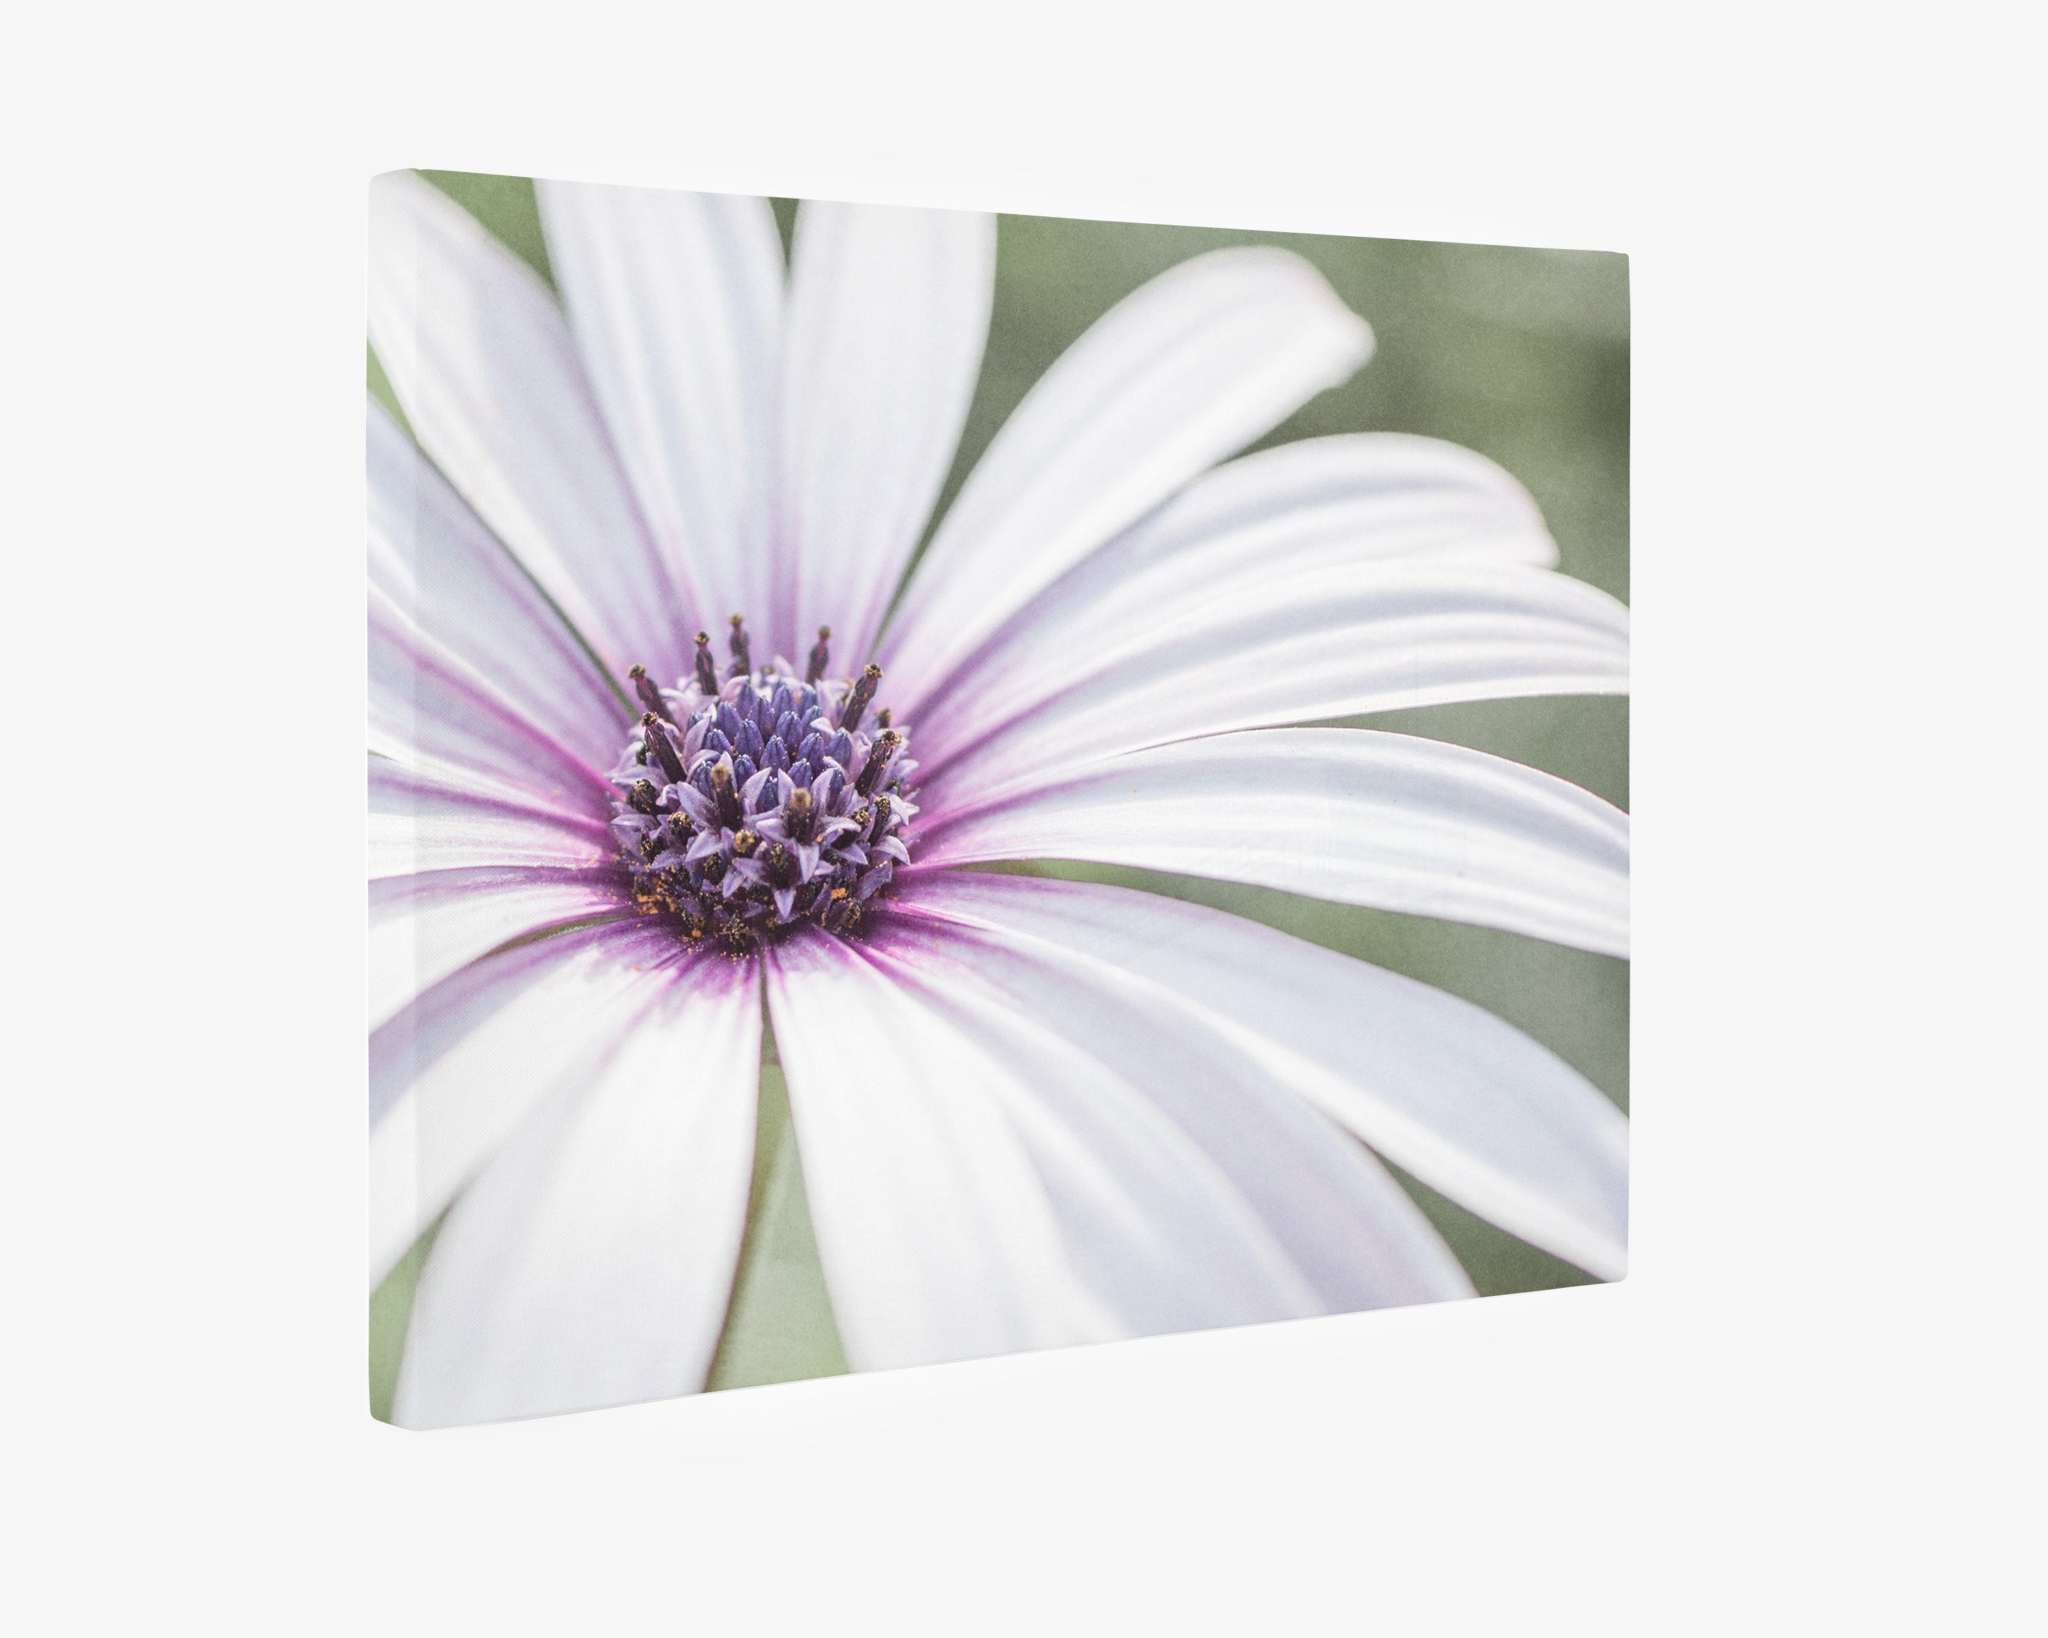 A close-up view of a white and purple daisy flower printed on an artist-grade poly-cotton blend canvas. The flower&#39;s intricate details, including its purple center and delicate petals, are prominently featured against a soft, blurred background. This ready-to-hang solution boasts a clean, minimalistic design. &#39;Bed of Petals&#39; by Offley Green provides a stunning representation of nature with the Large White Daisy Flower Picture in their Floral Wall Art collection.